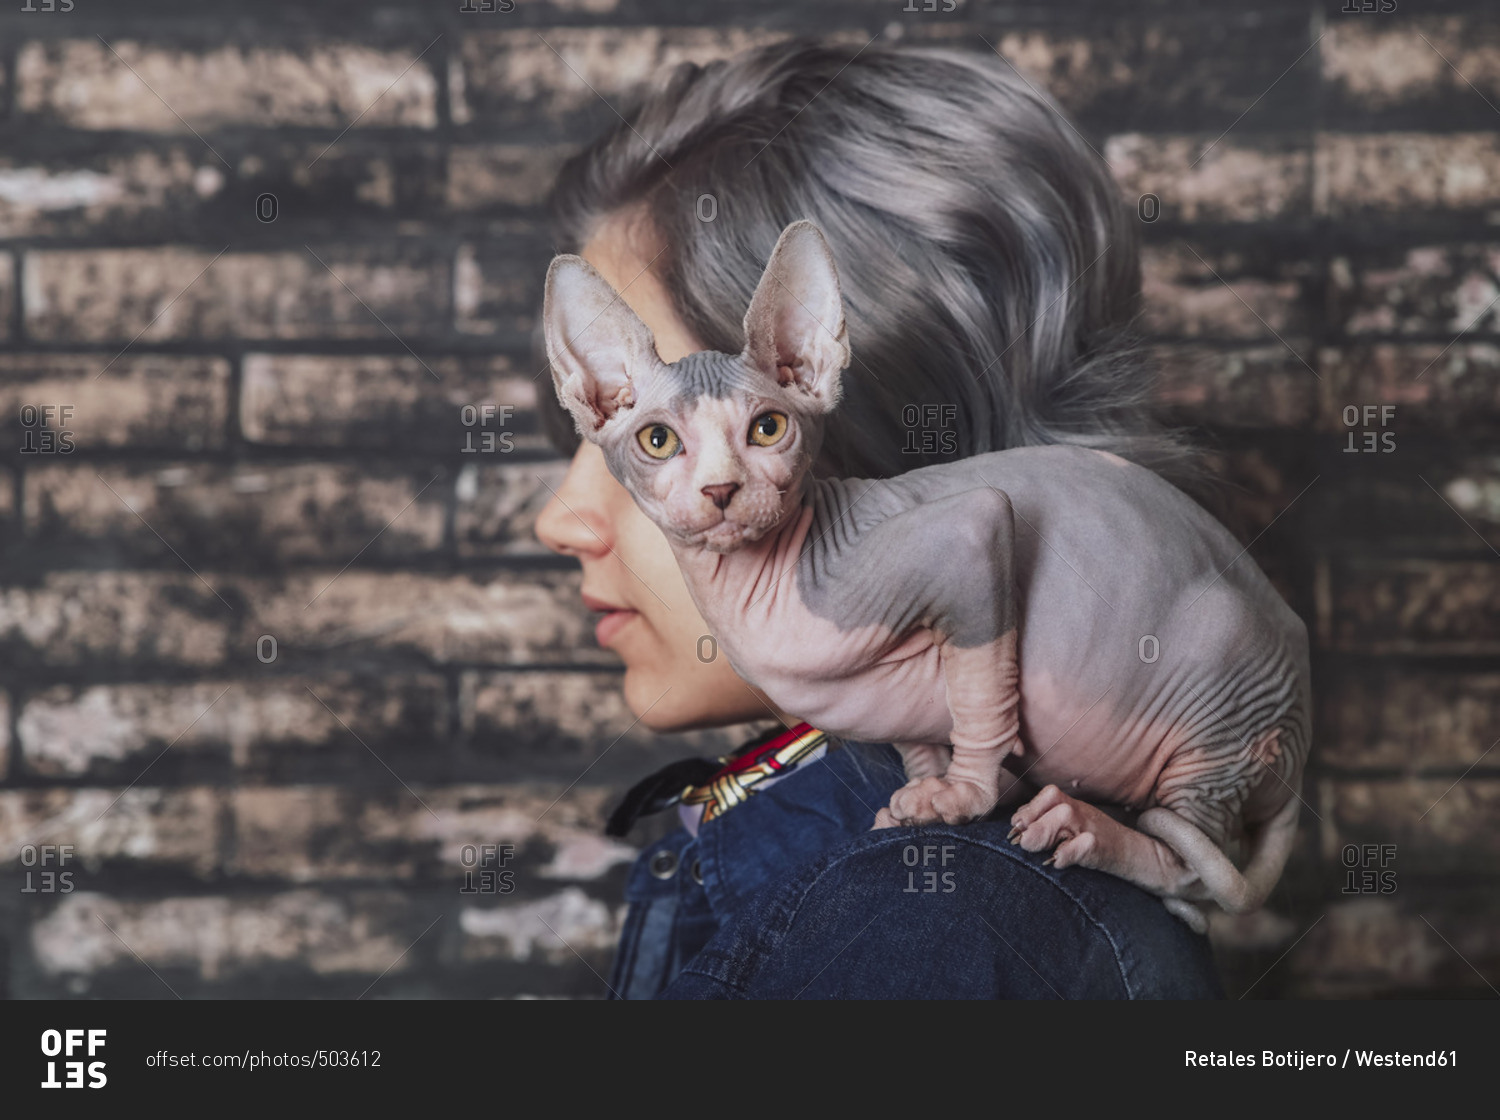 Young woman carrying Sphynx cat on shoulder